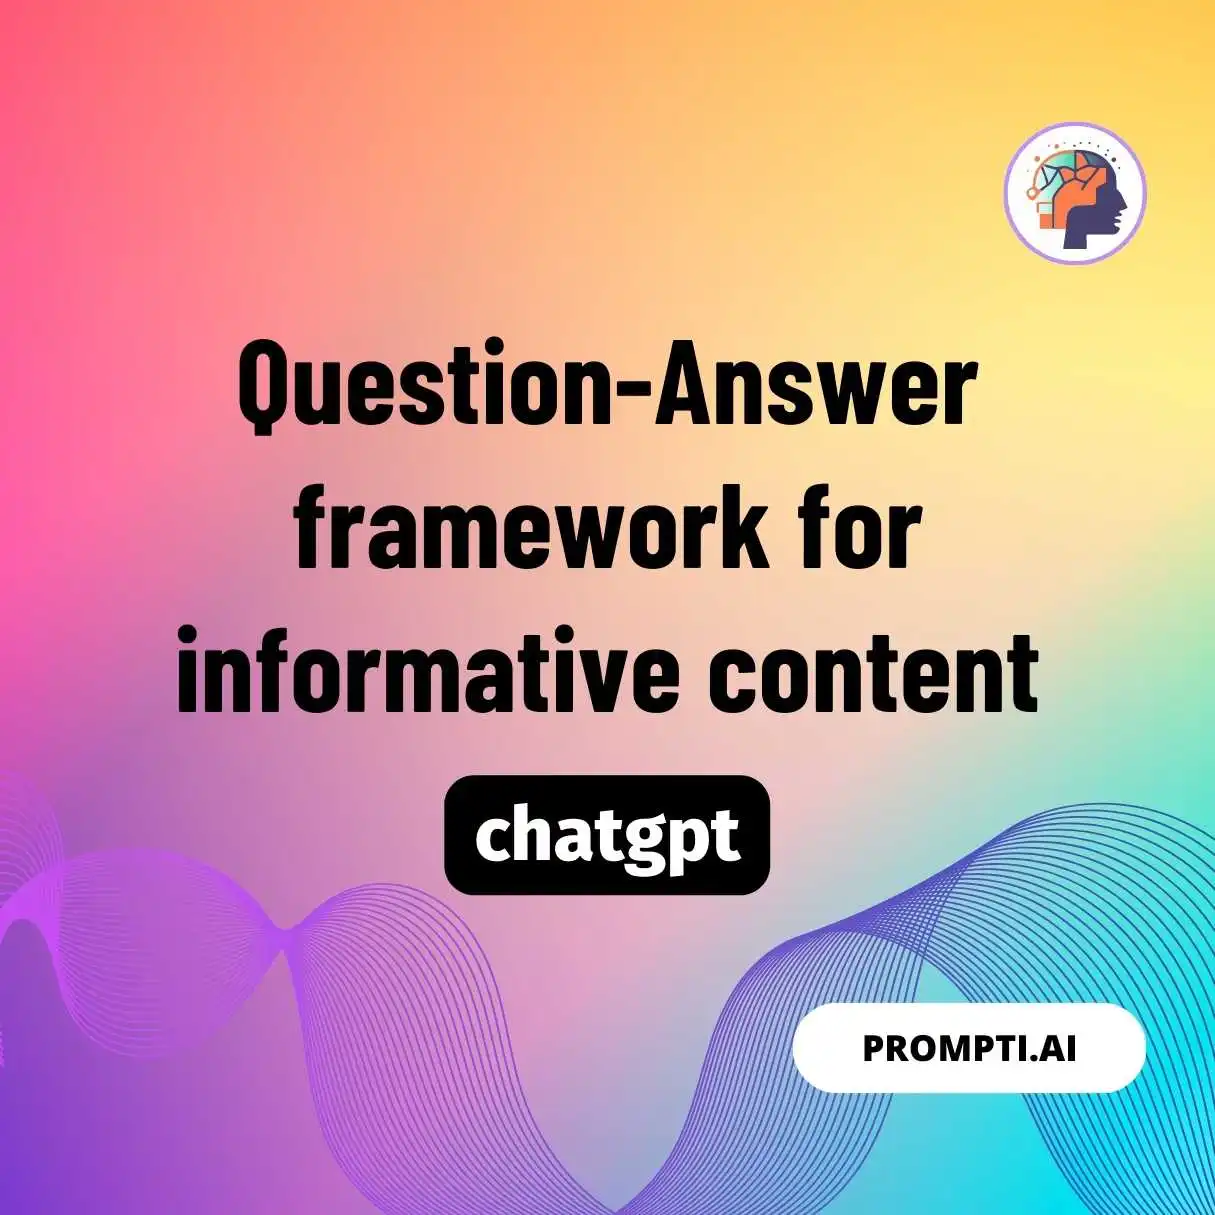 Question-Answer framework for informative content